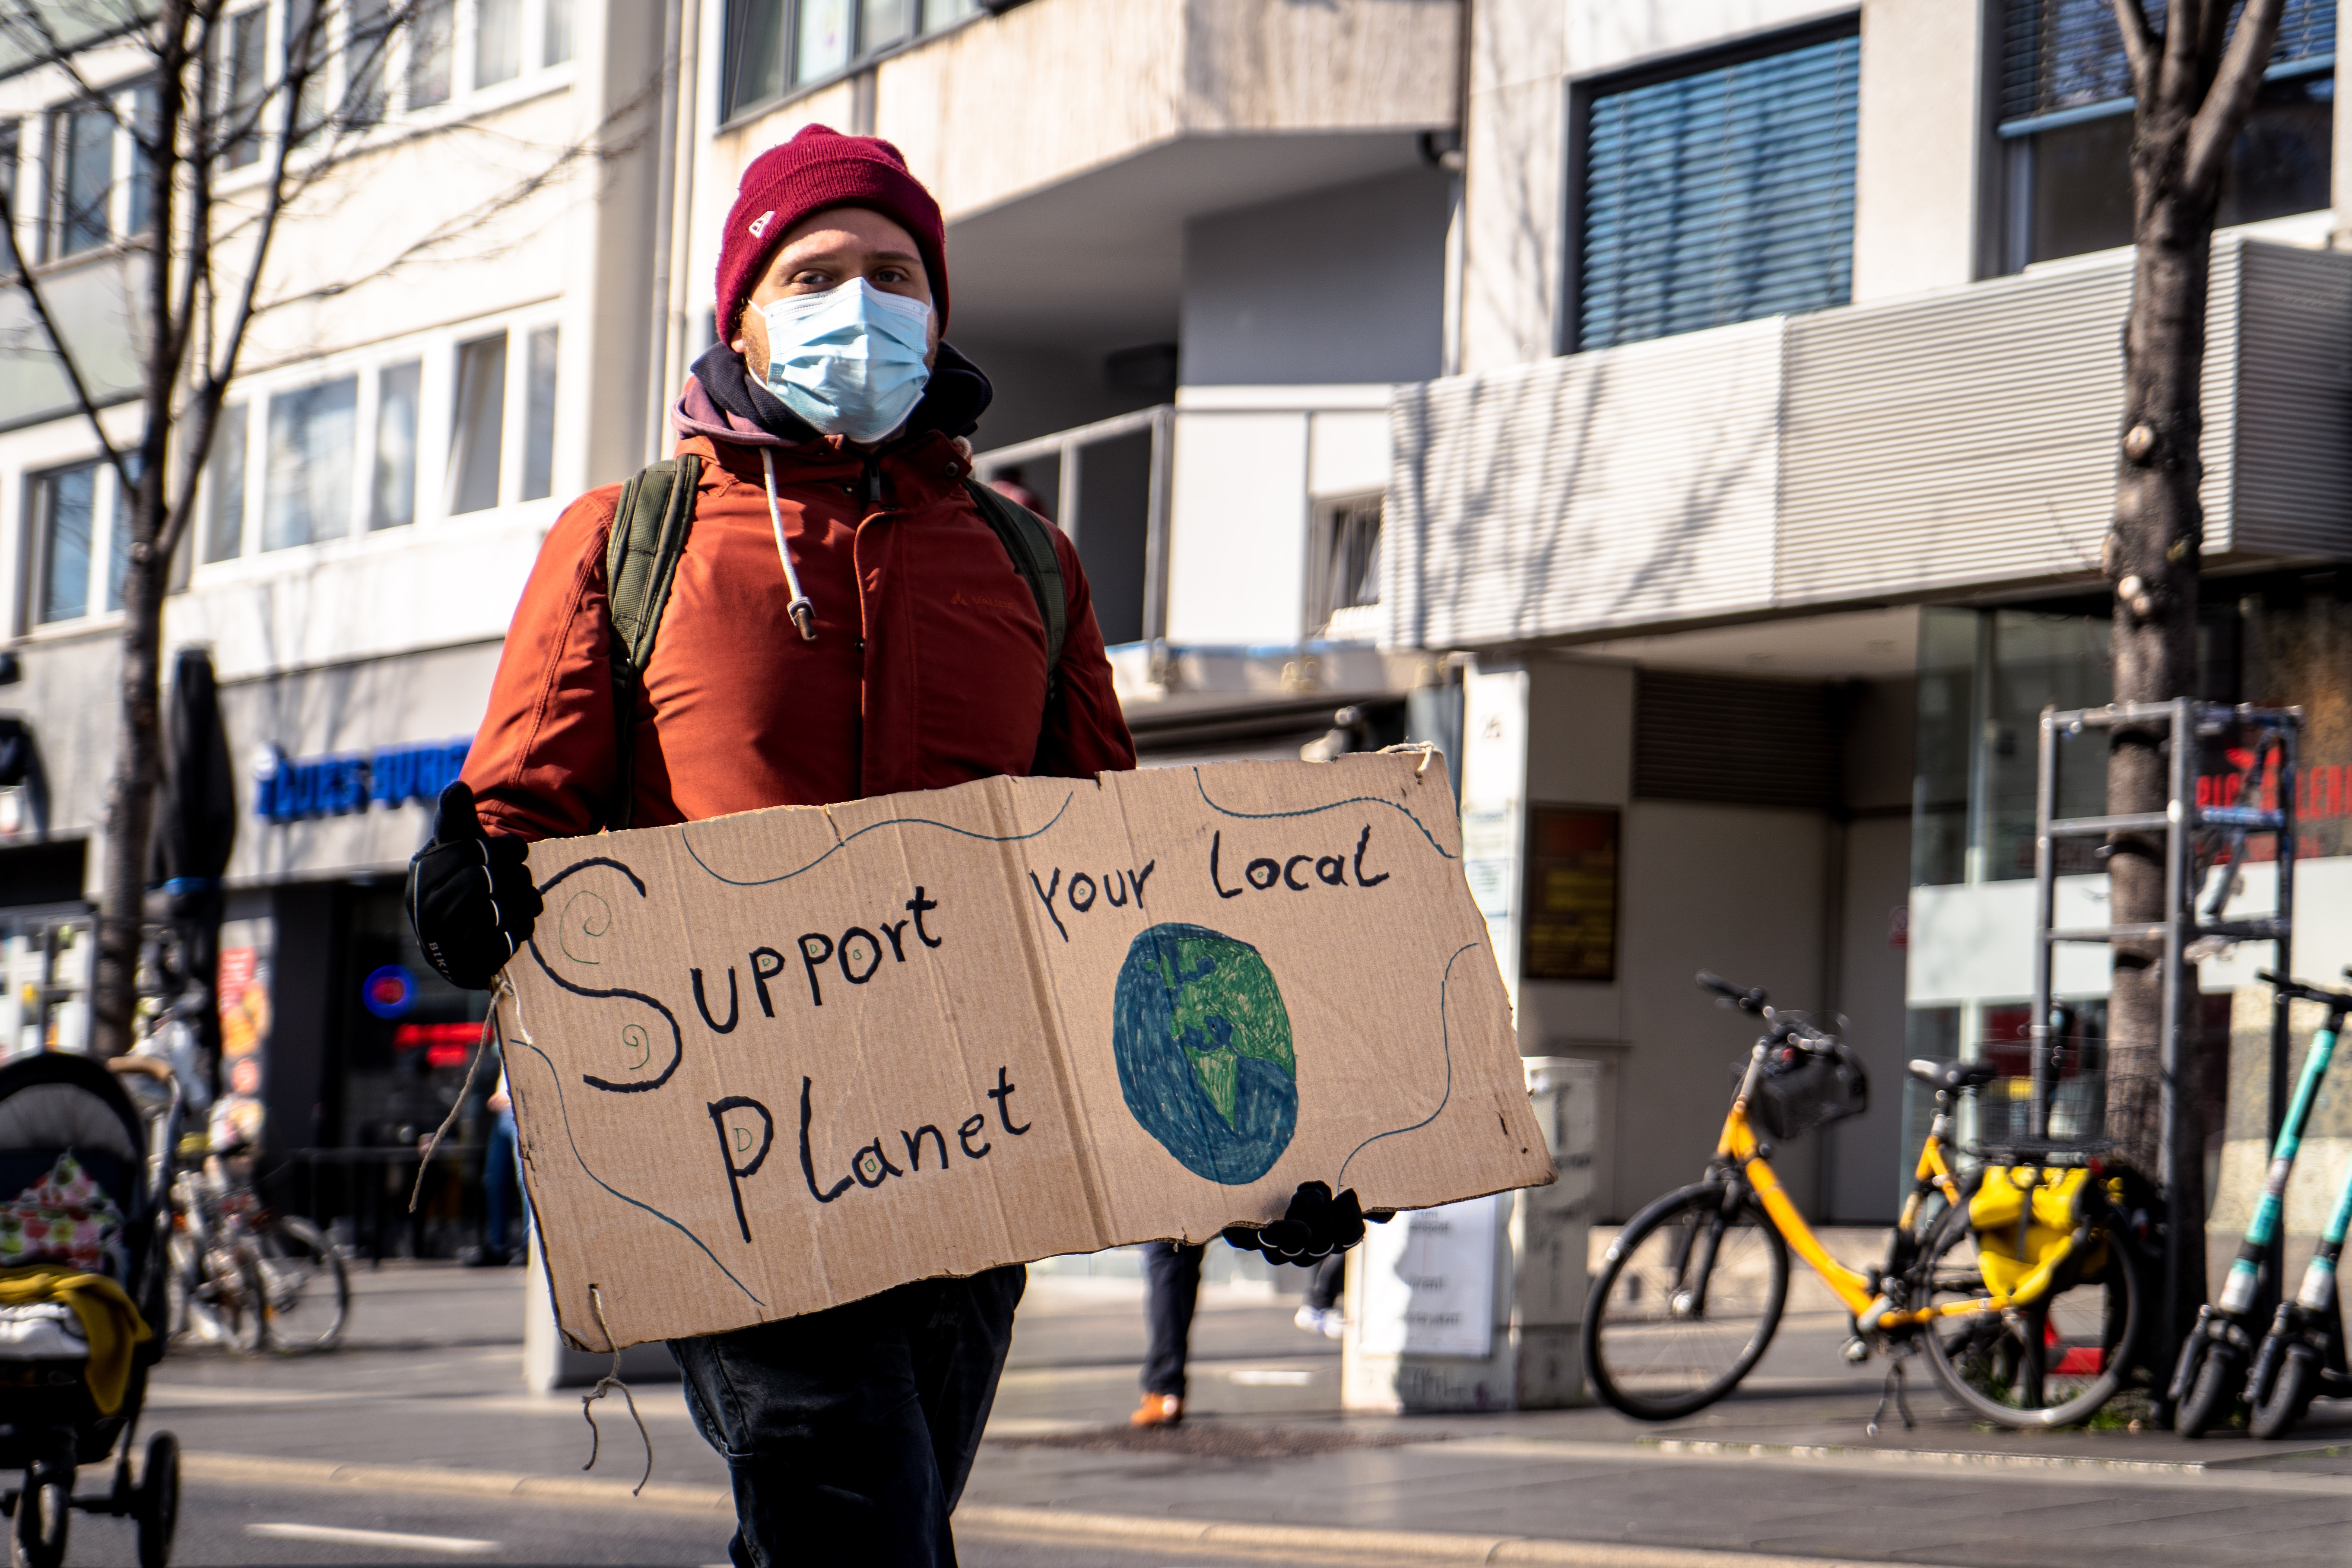 person in red, hooded winter jacket holding cardboard sign reading "support your local planet"